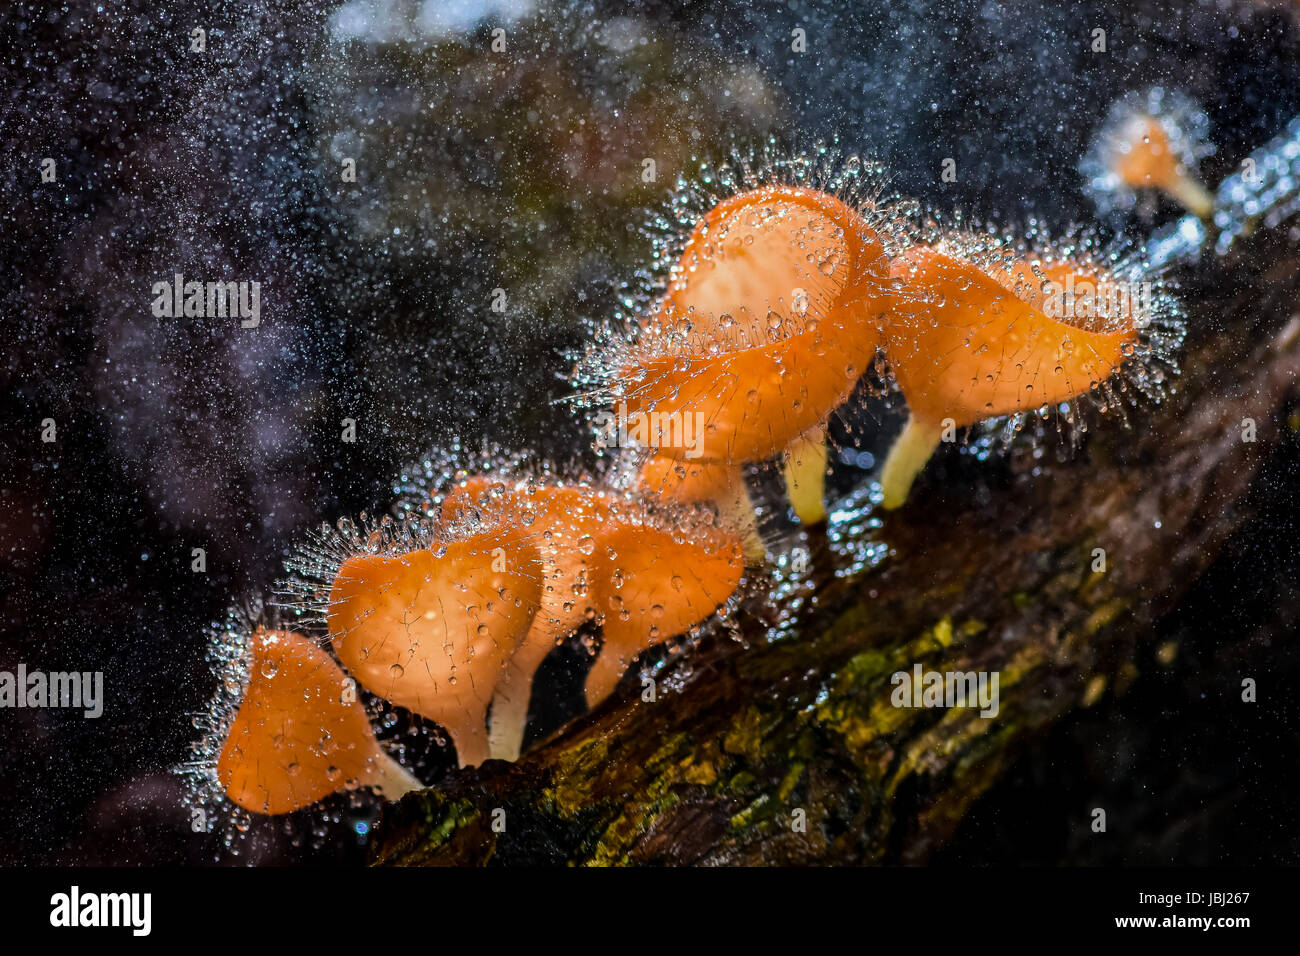 Hairy mushroom with sprayed water in national park of Thailand Stock Photo